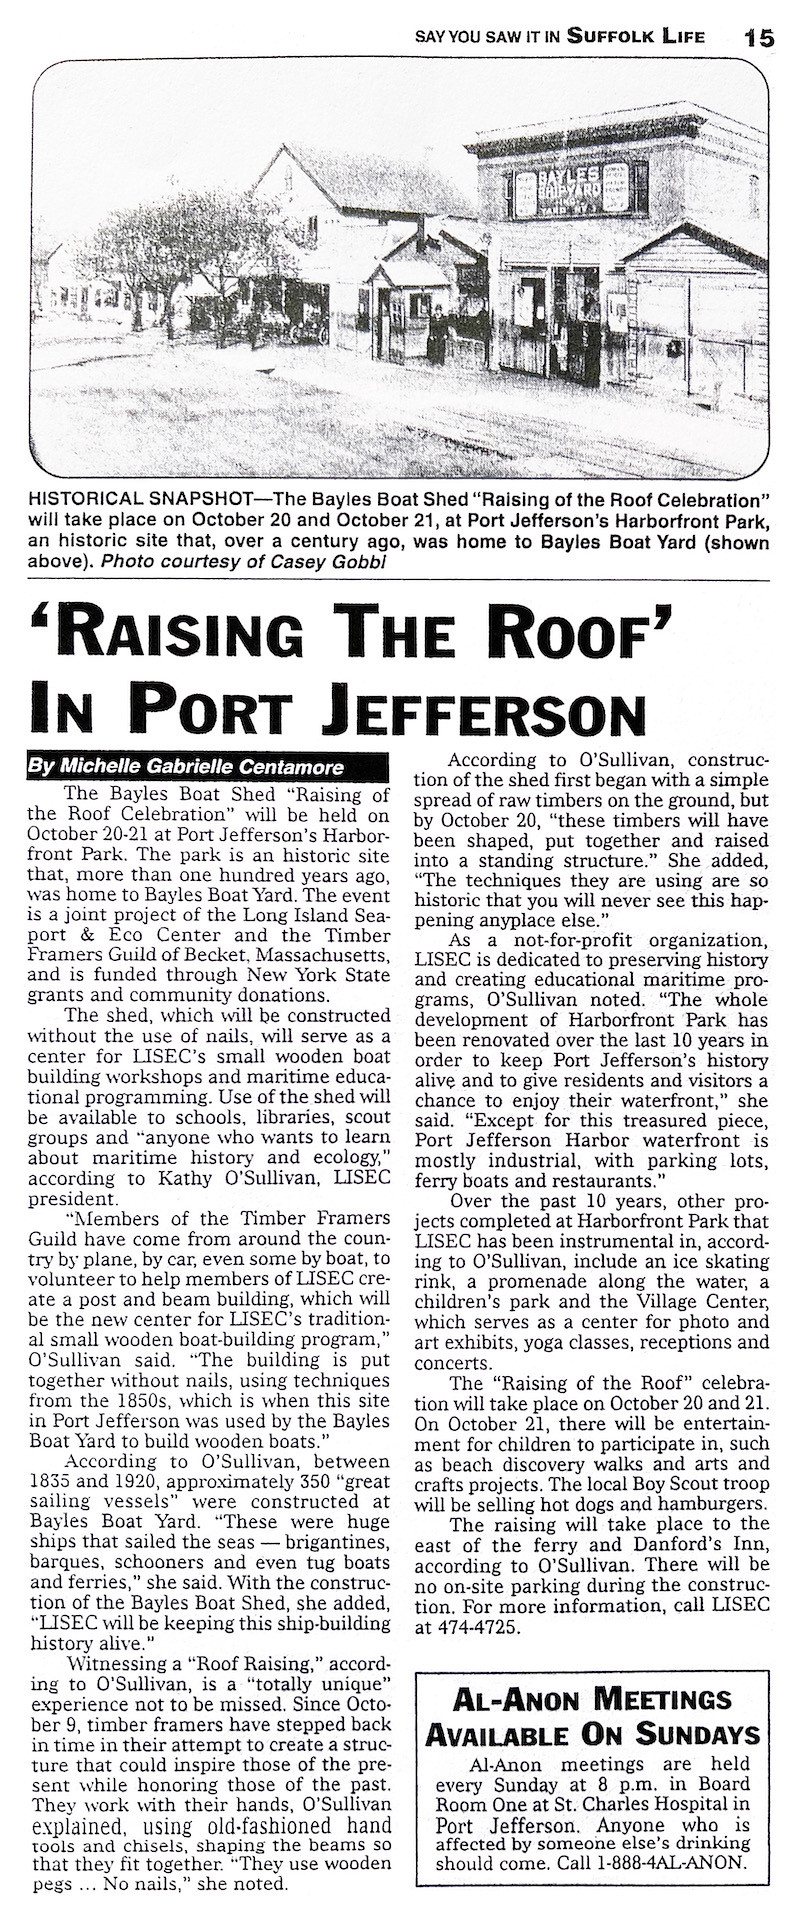 Suffolk Life | Raising the roof in Port Jefferson